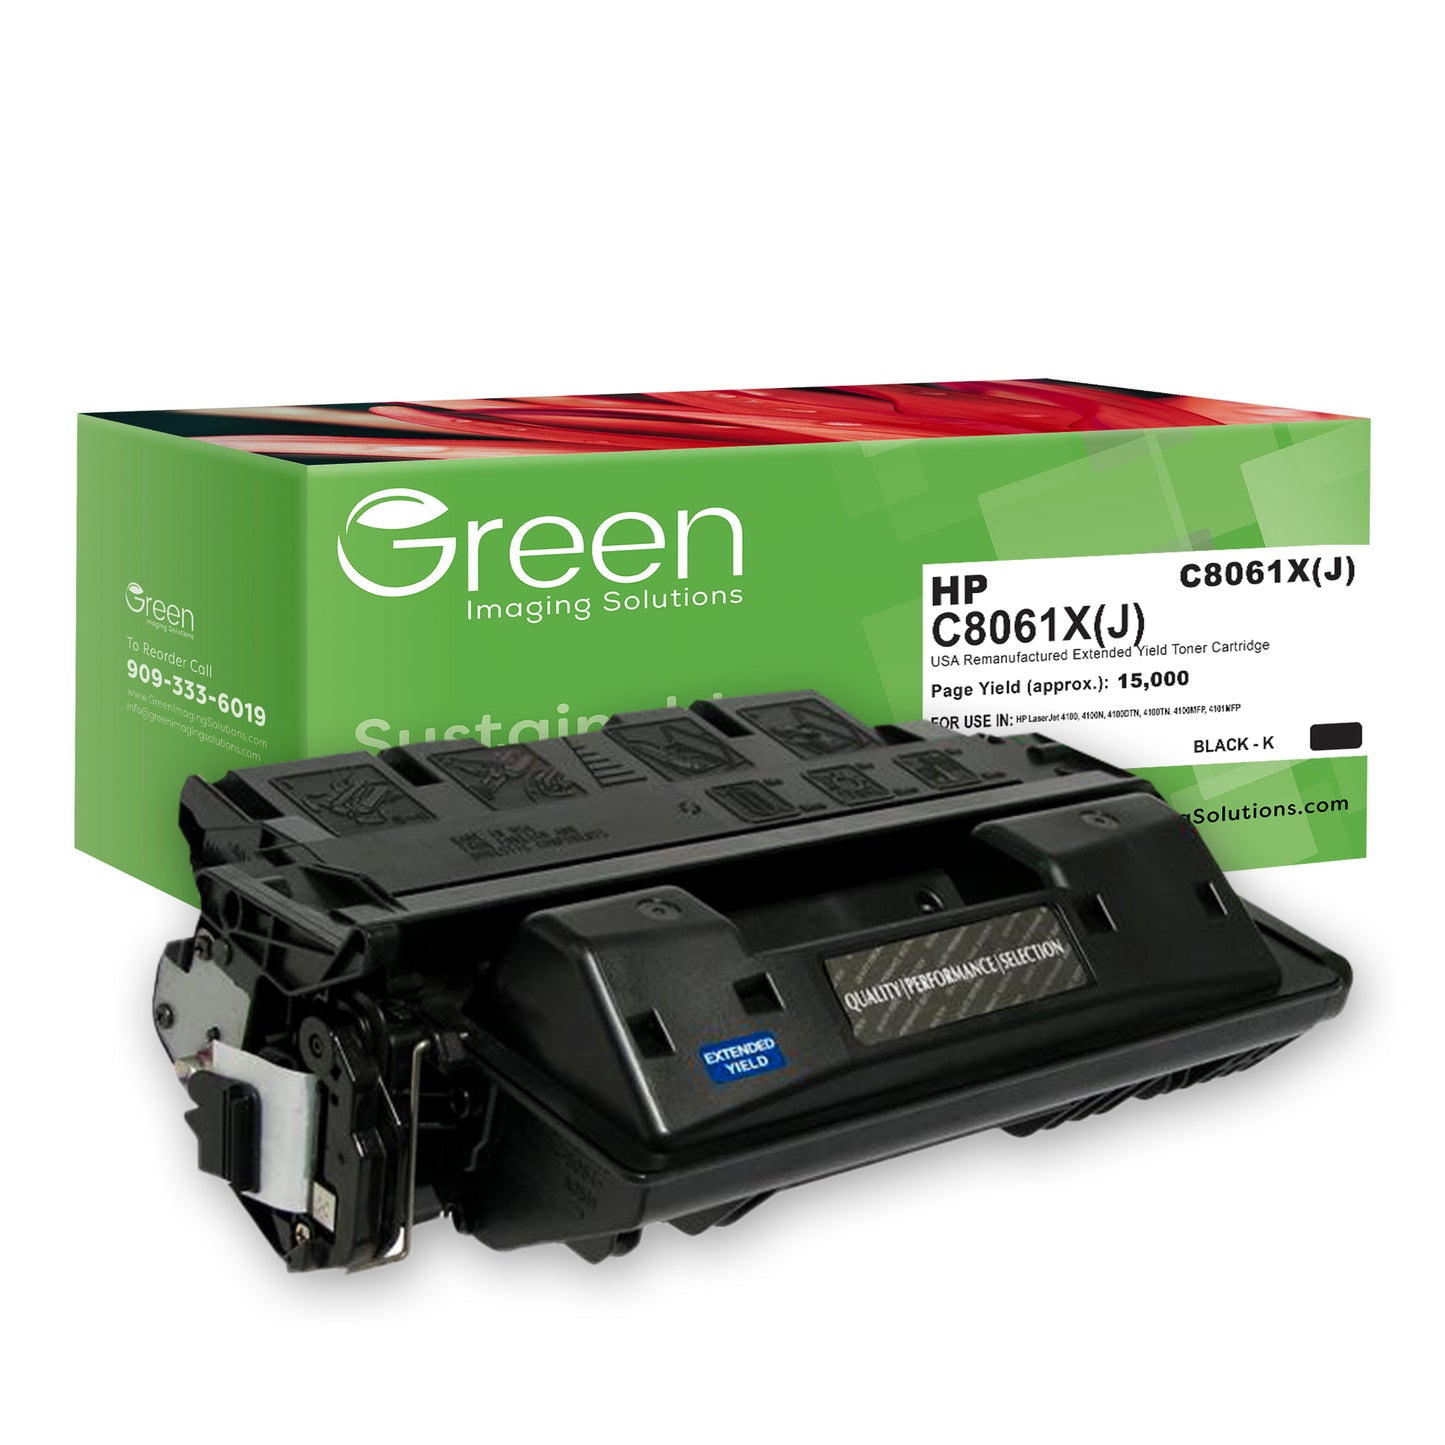 GIS USA Remanufactured Extended Yield Toner Cartridge for HP C8061X